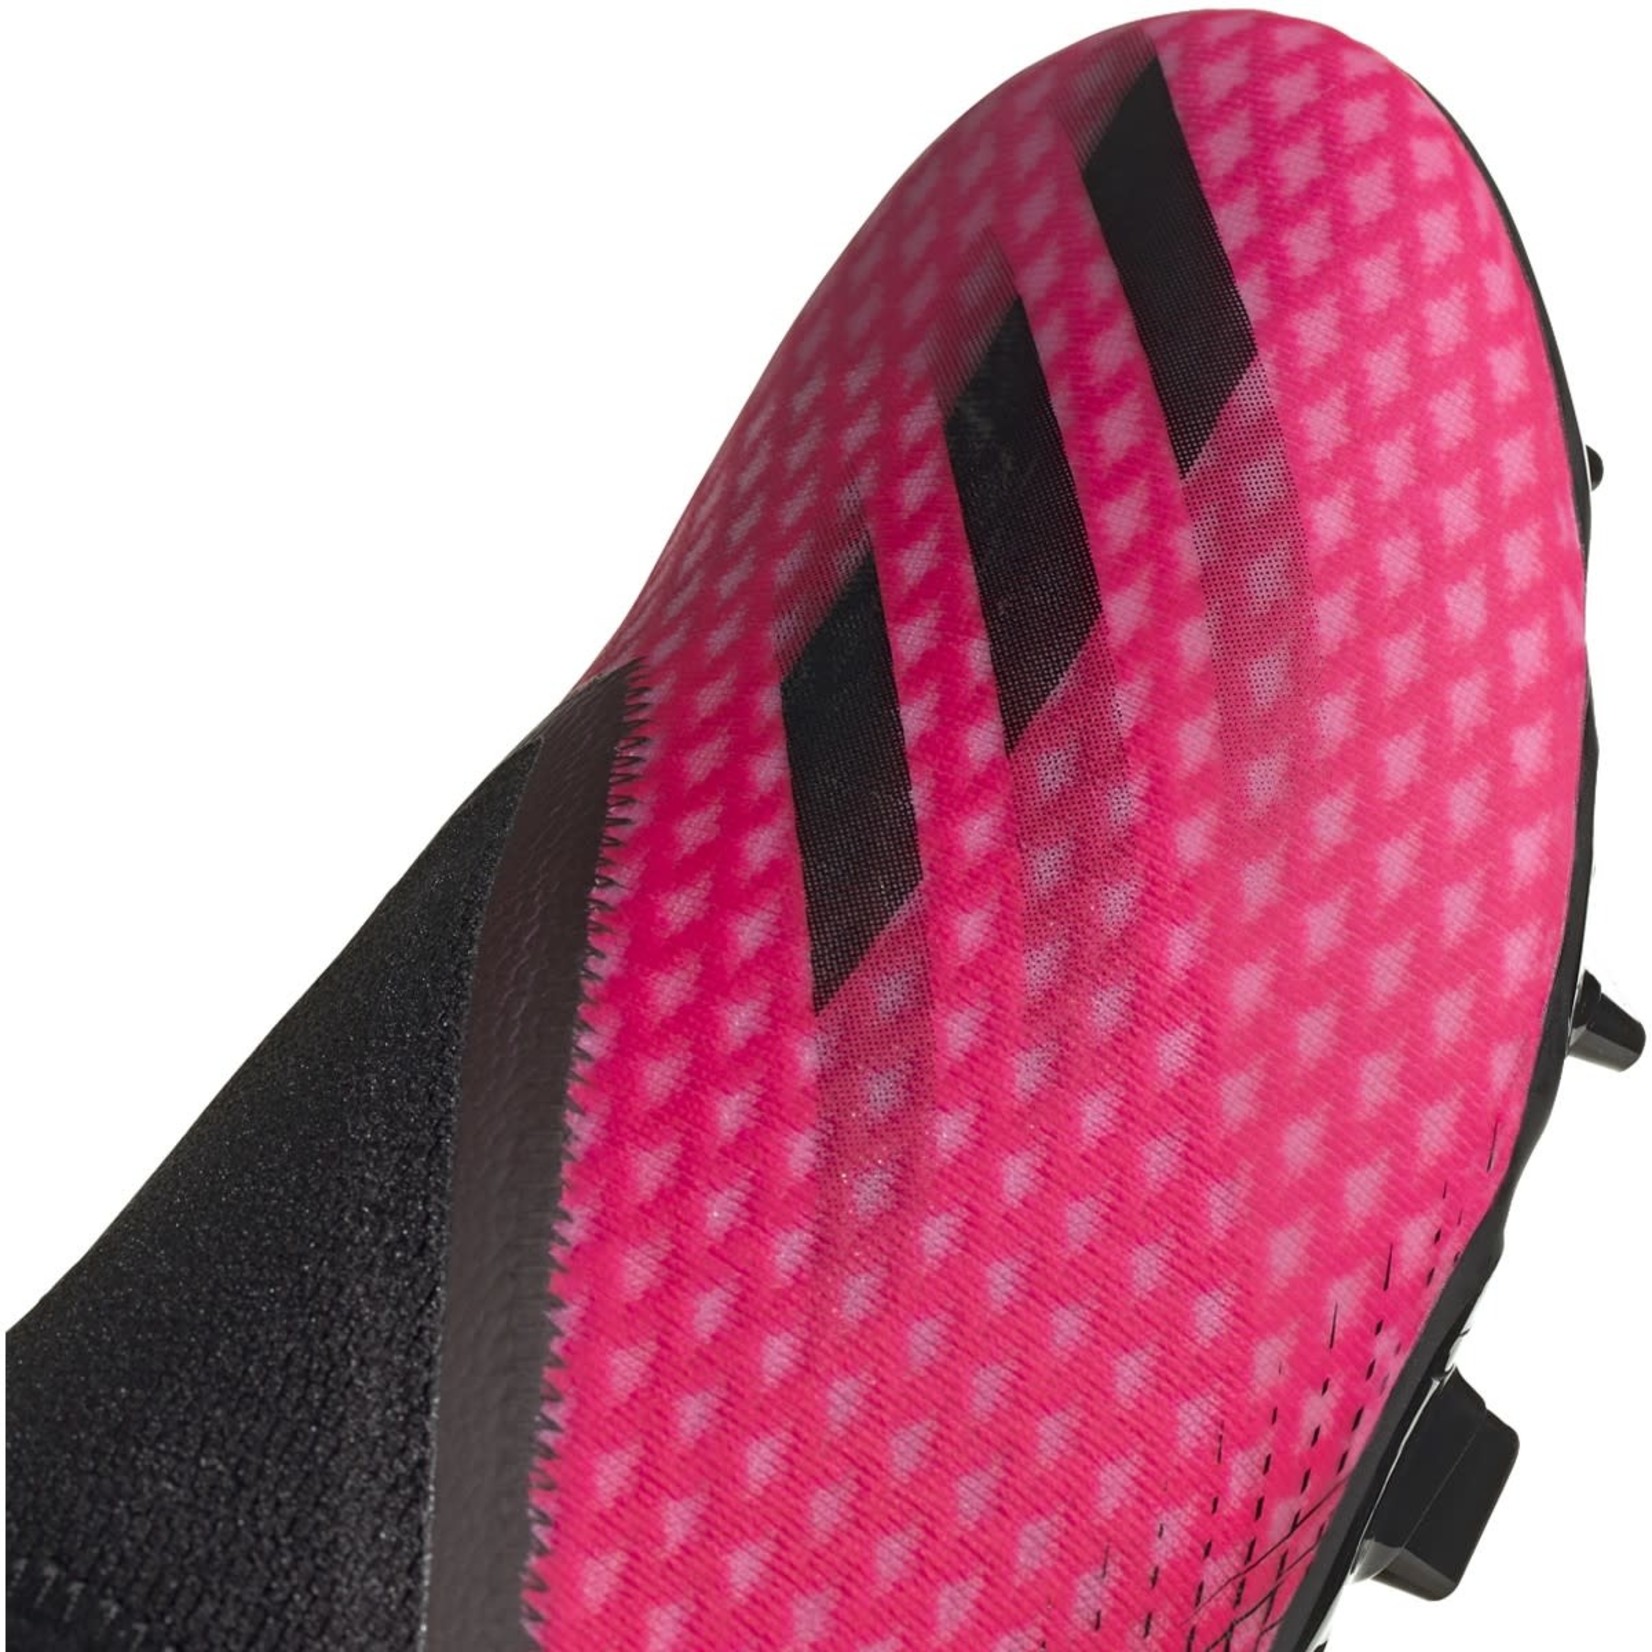 ADIDAS X GHOSTED.3 LACELESS FG (PINK/BLACK)